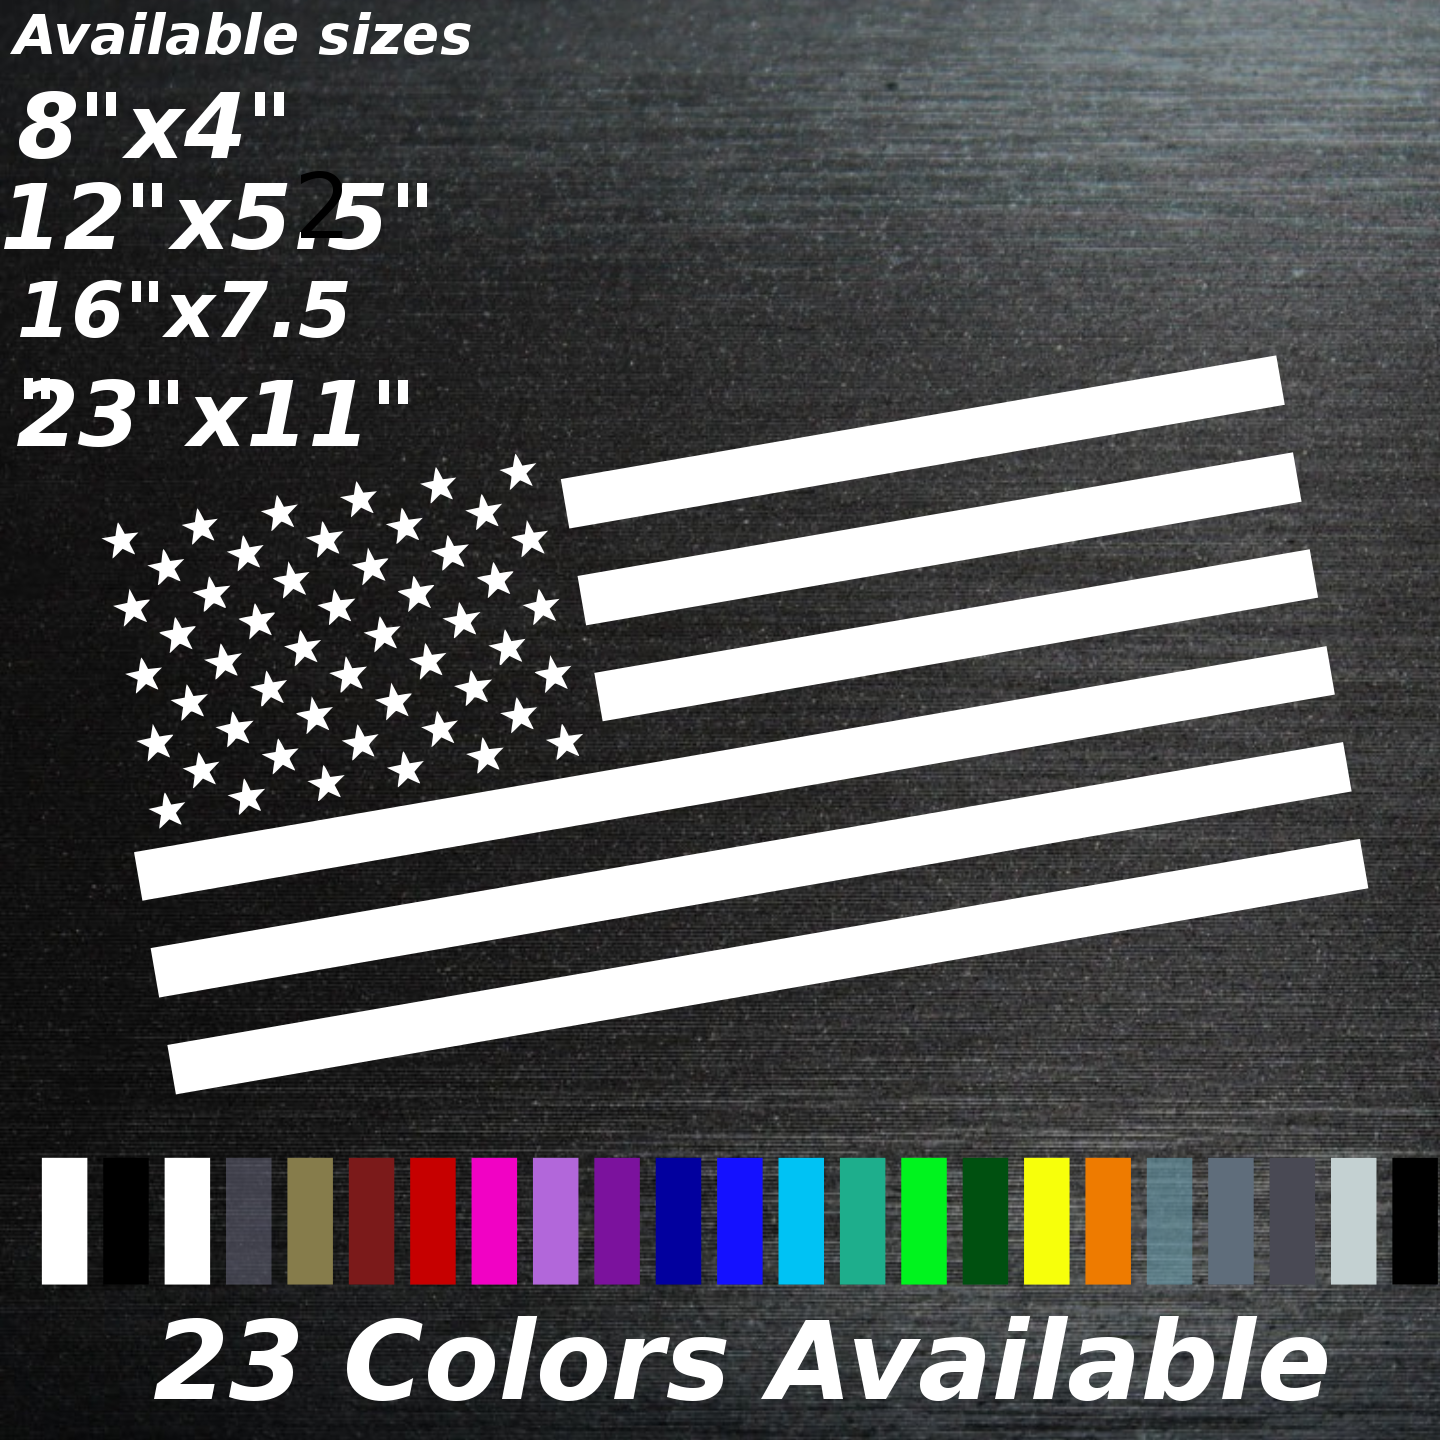 AMERICAN FLAG DECAL STICKER DECAL SINGLE COLOR CARS TRUCKS DIESEL NO BACKGROUND